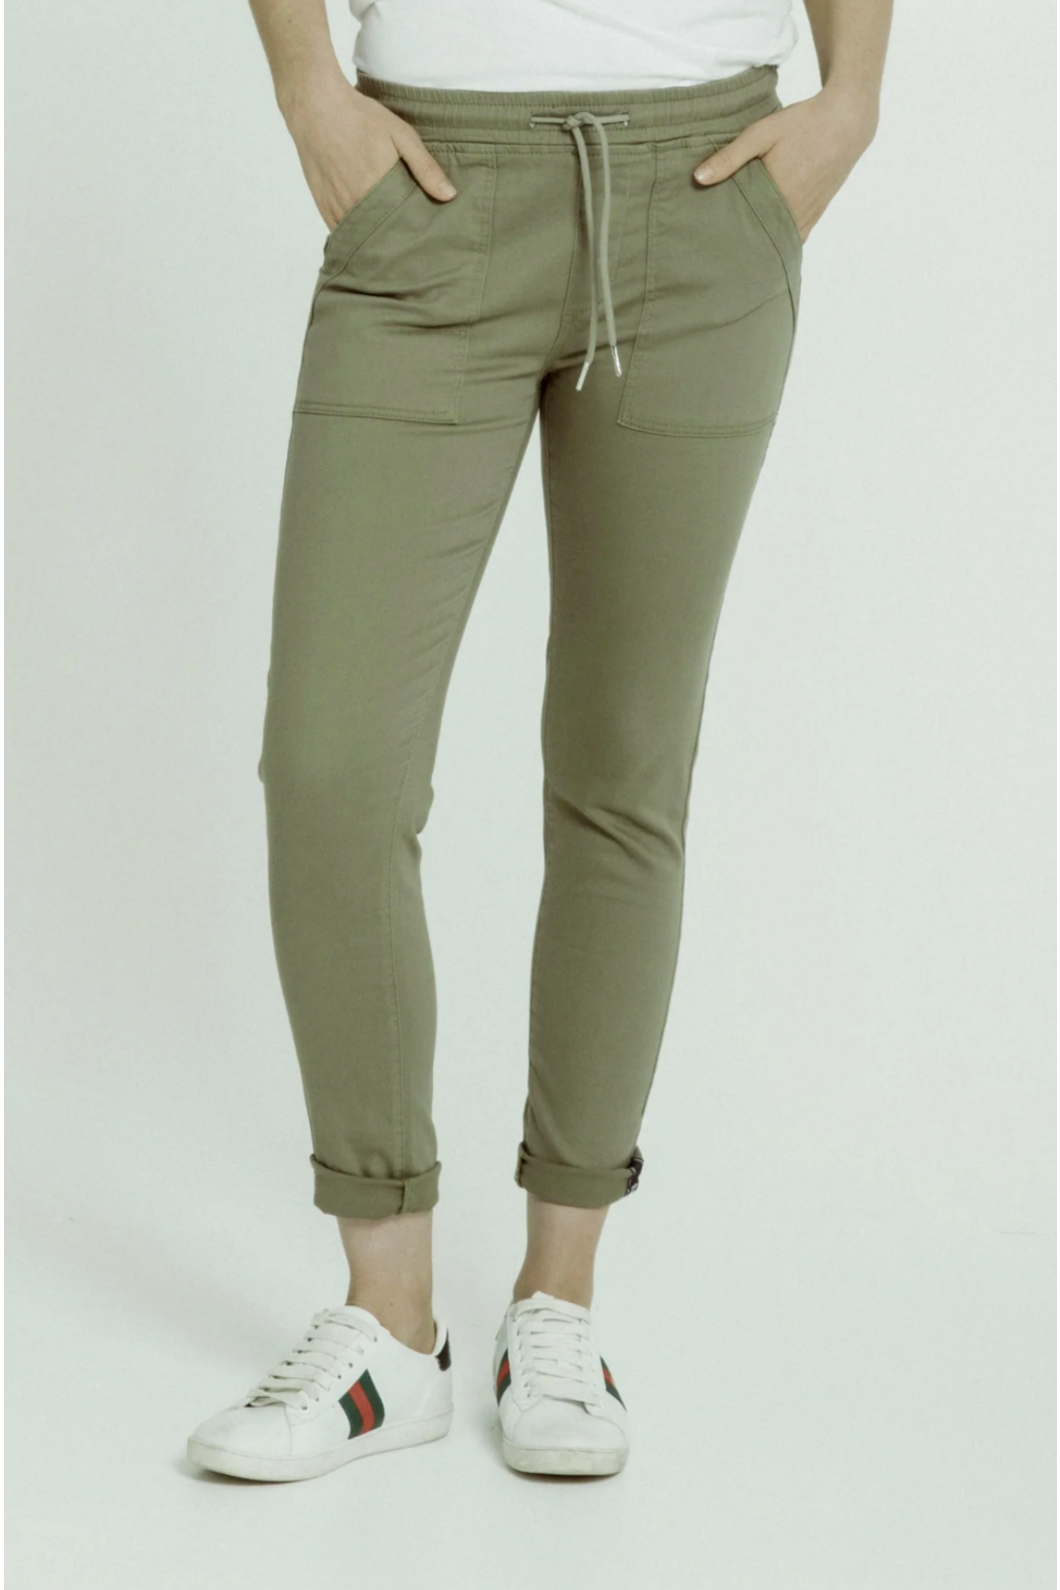 New London Pull On Hope Jogger Stretch Cotton in Khaki